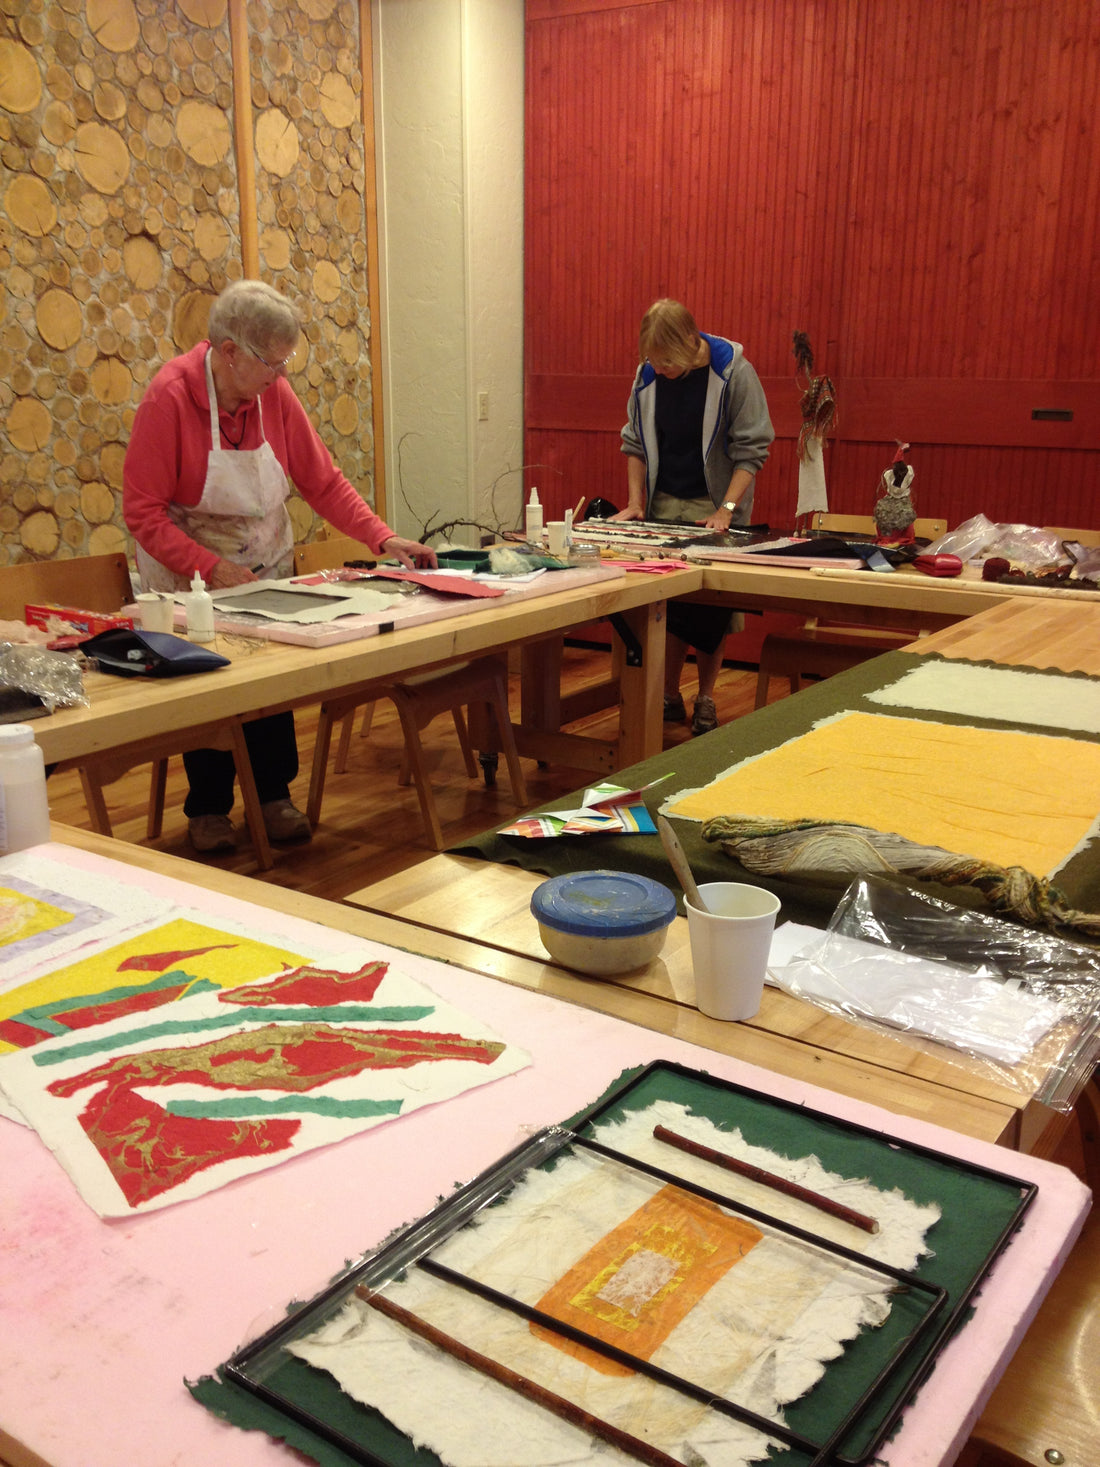 "Weaving in a paper maker's world" at the clearing folk art school, June 18-24, 2017